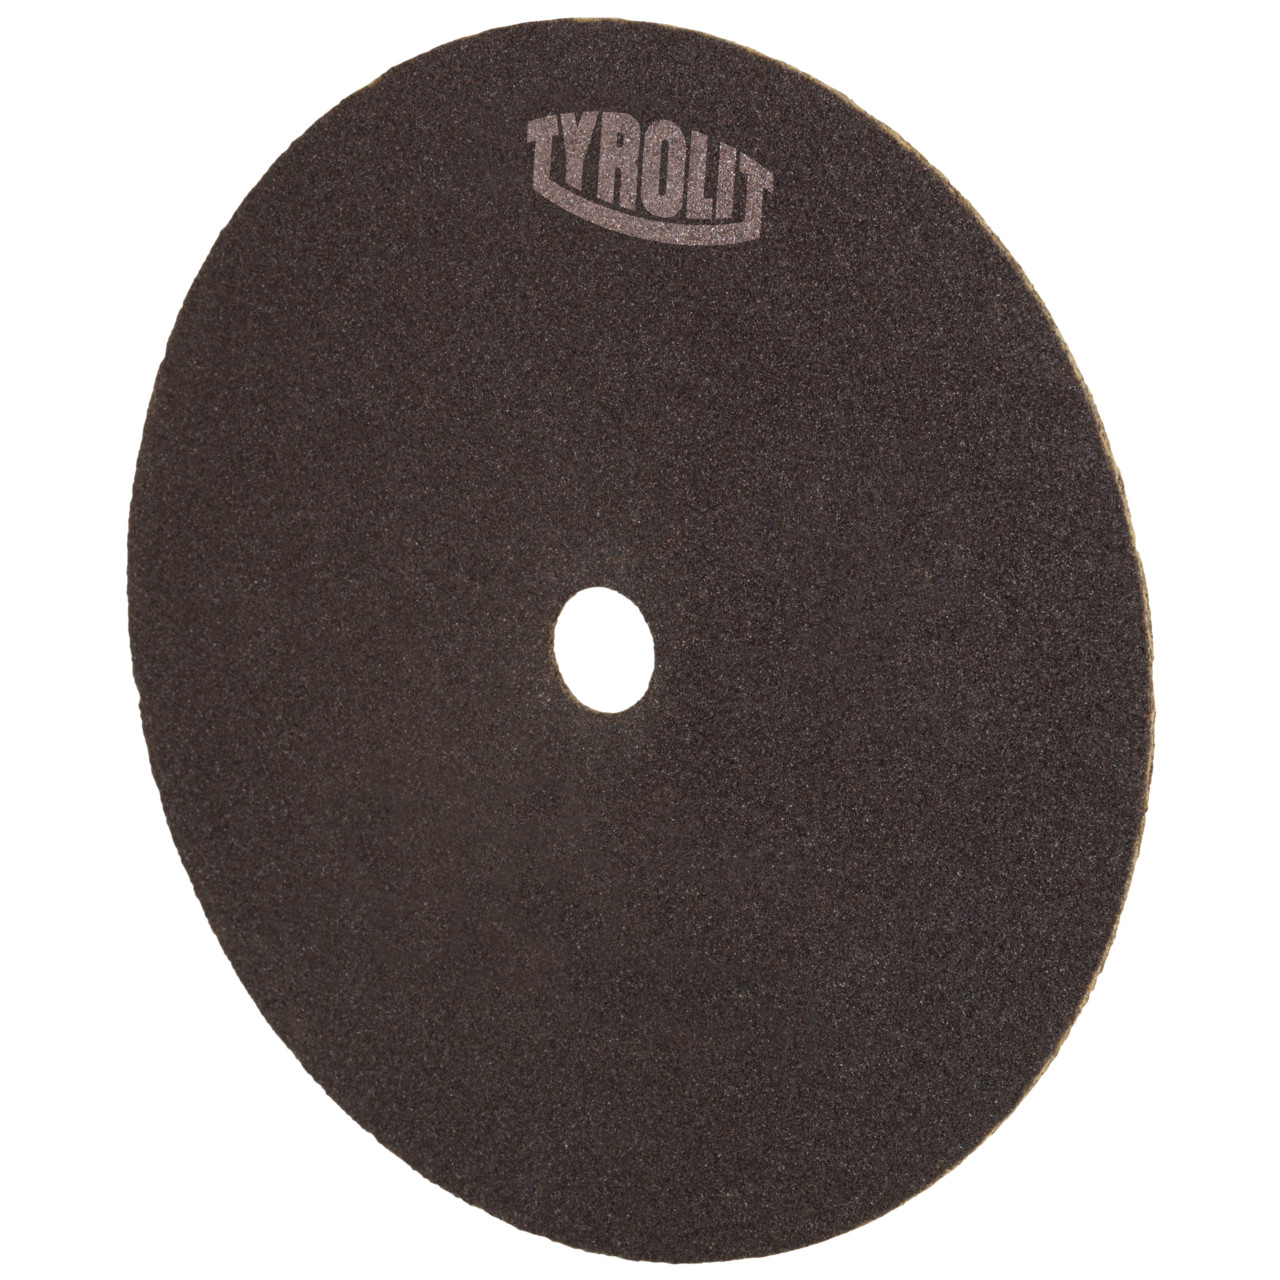 TYROLIT cut-off wheel for cutting and saw sharpening DxDxH 150x1.5x20 For steel and HSS, shape: 41N - straight version (non-woven cut-off wheel), Art. 282085